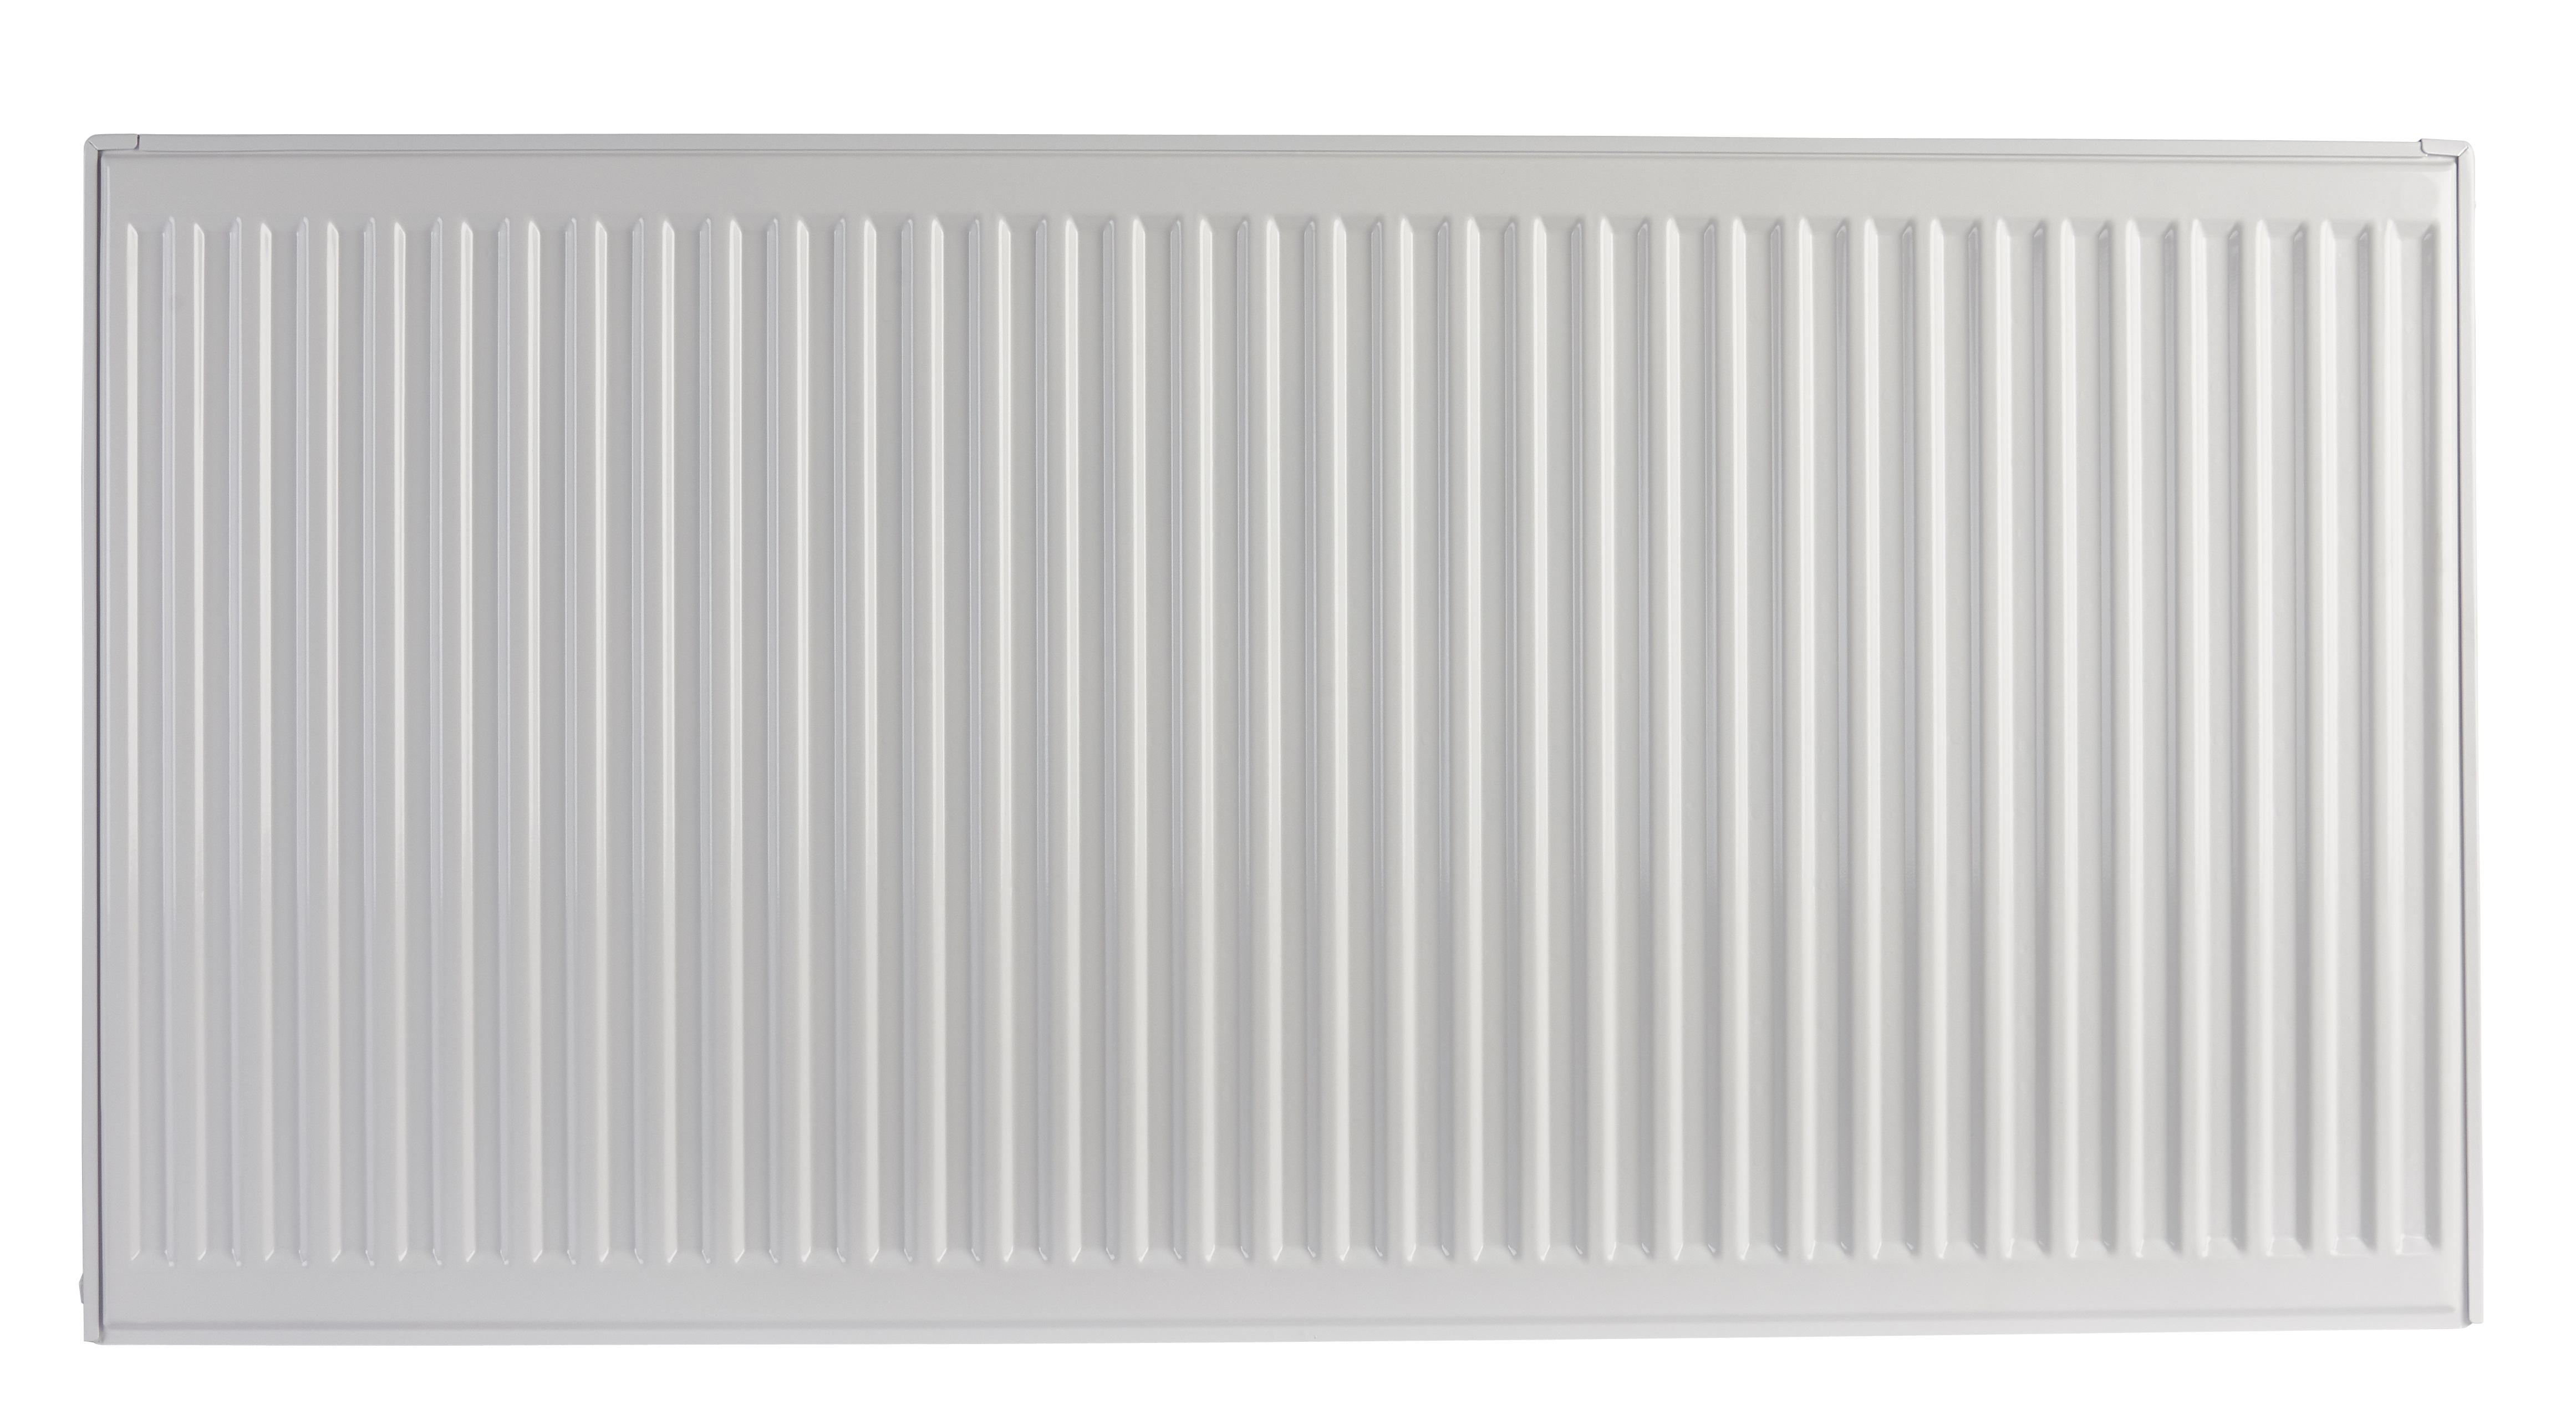 Homeline by Stelrad Type 21 Double Panel Plus Single Convector Radiator - 400 x 1200mm